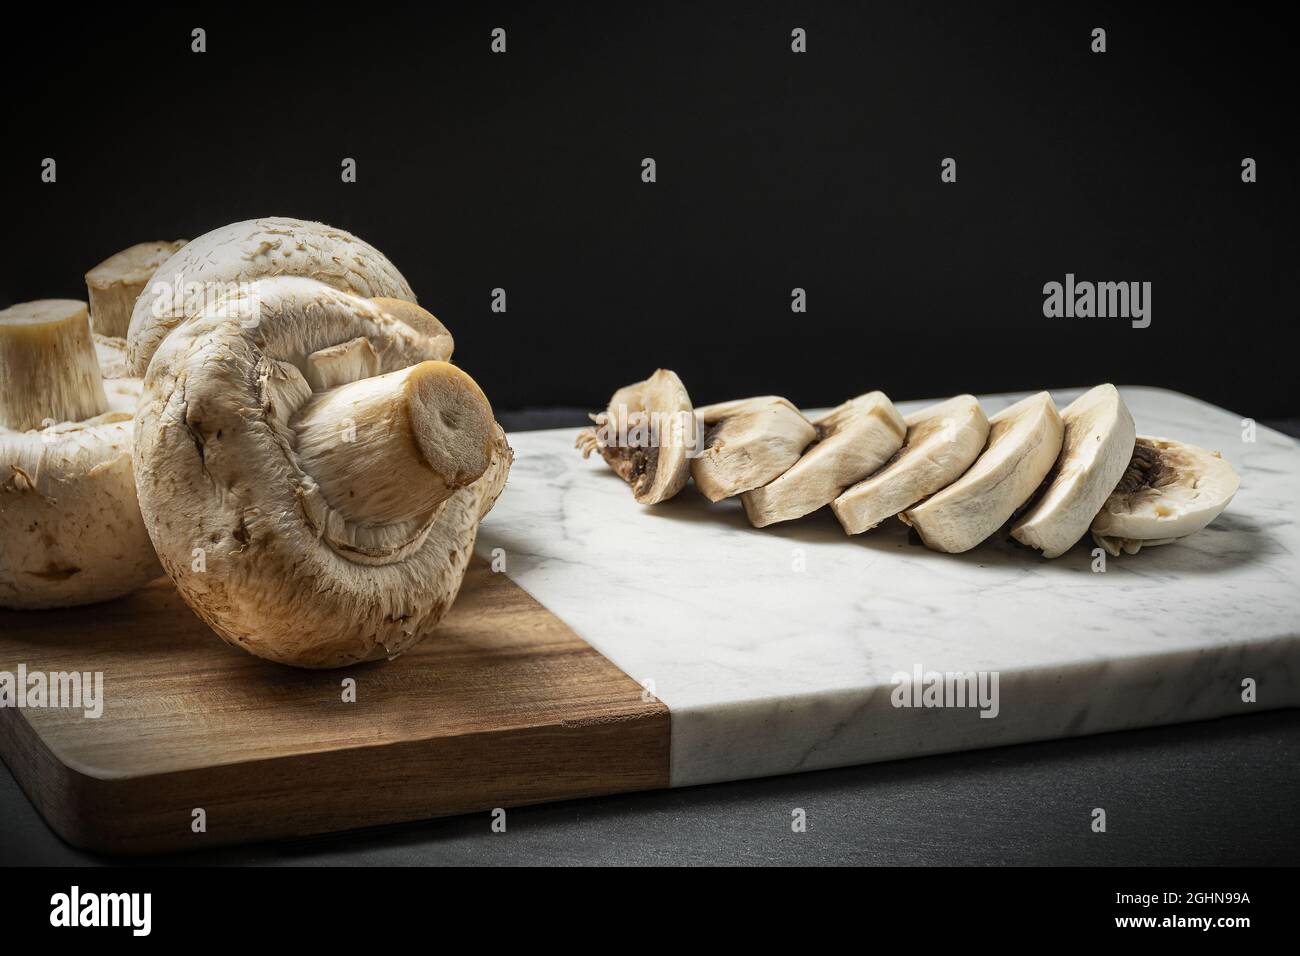 Closeup view of sliced up  champignon mushrooms and whole mushrooms on a wooden board Stock Photo